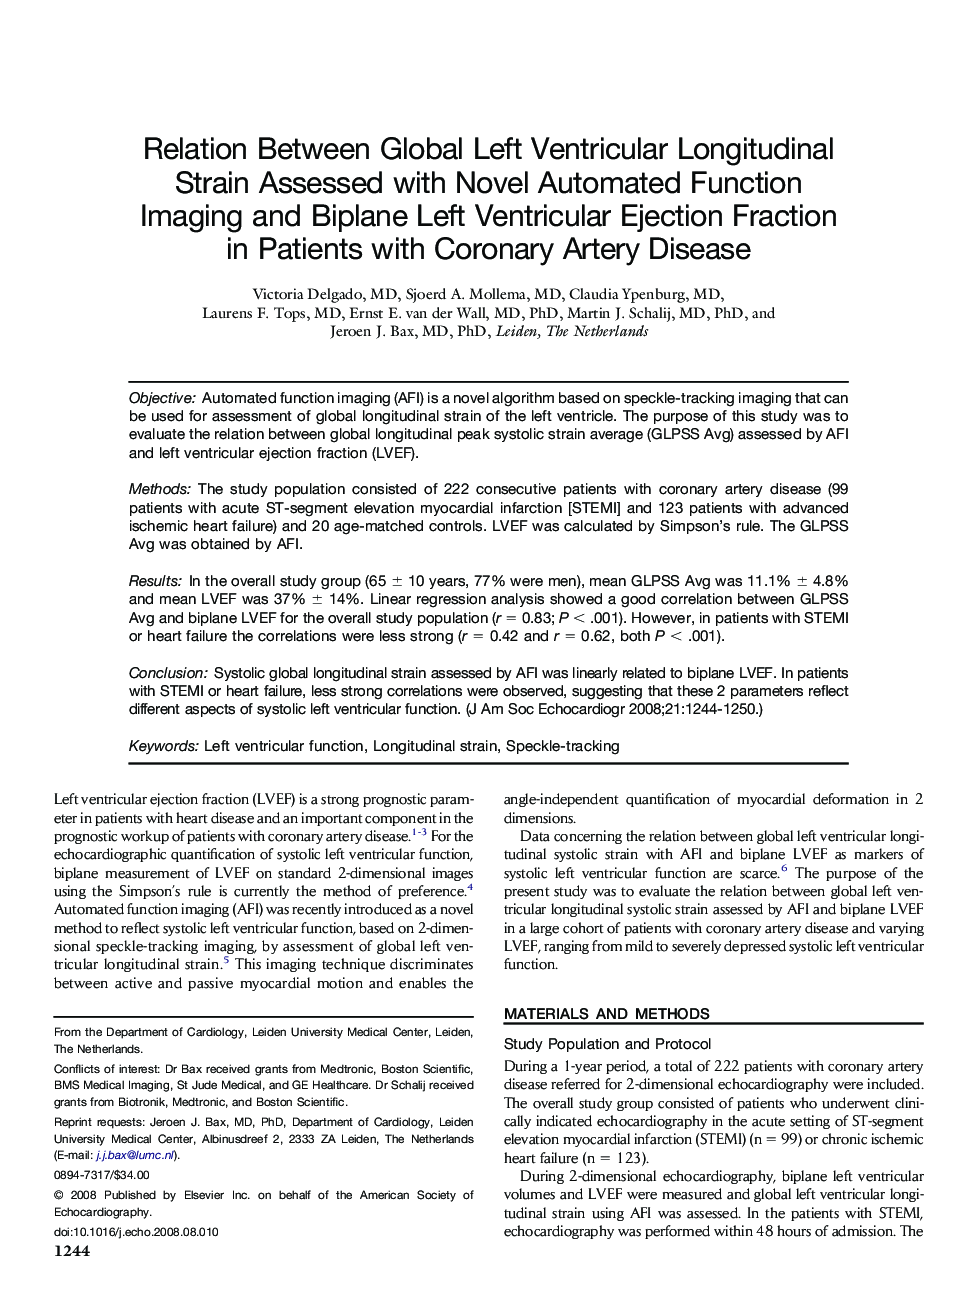 Relation Between Global Left Ventricular Longitudinal Strain Assessed with Novel Automated Function Imaging and Biplane Left Ventricular Ejection Fraction in Patients with Coronary Artery Disease